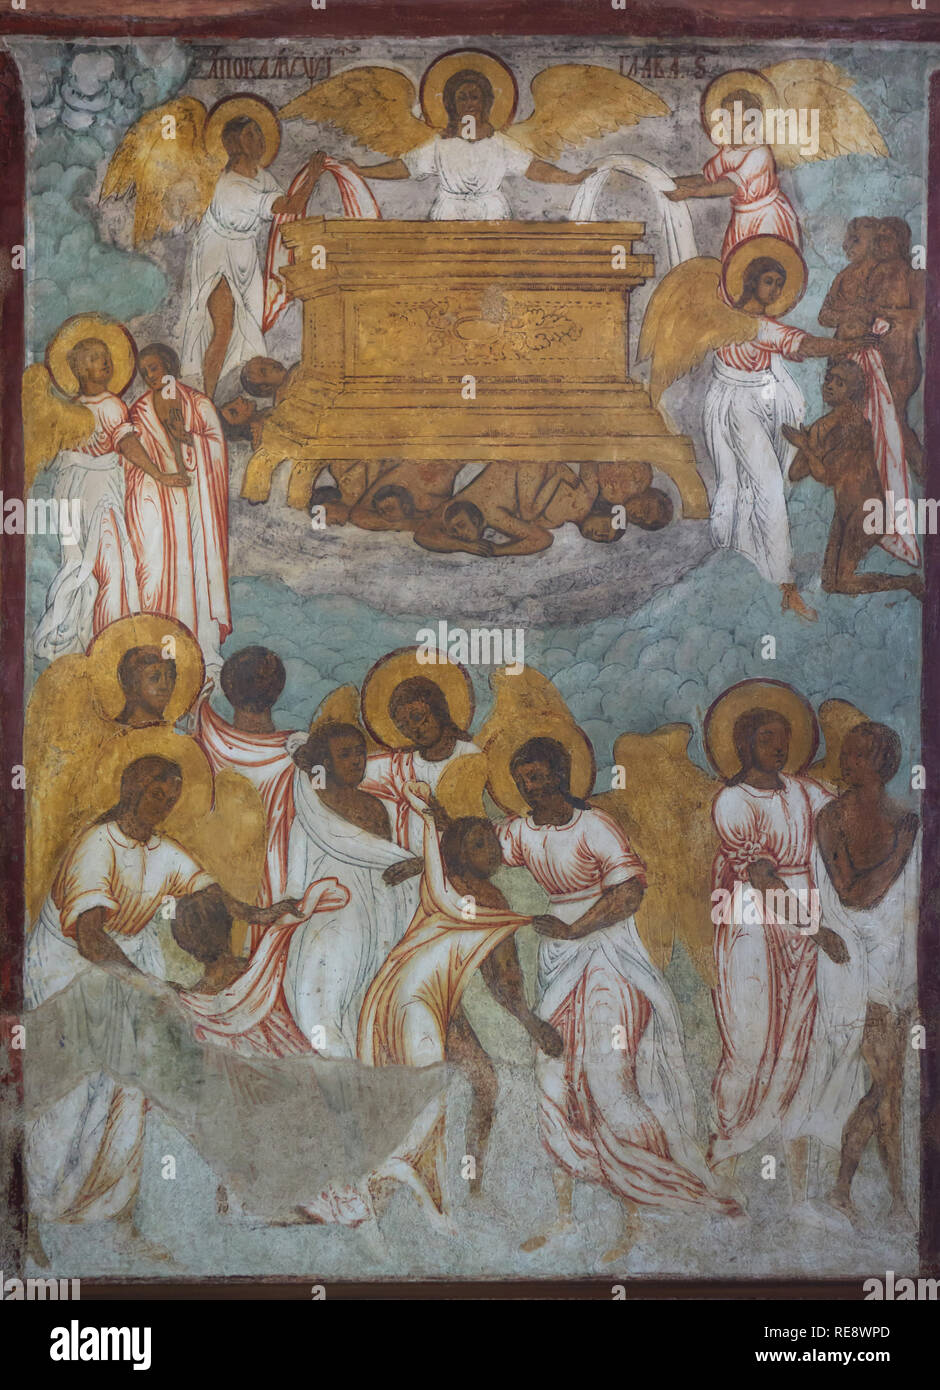 Opening of the Fifth Seal. Fresco by Russian icon painters Gury Nikitin and Sila Savin (1680) in the west gallery (papert) of the Church of Elijah the Prophet in Yaroslavl, Russia. The souls of martyrs for the Word of God are depicted given white robes. Stock Photo